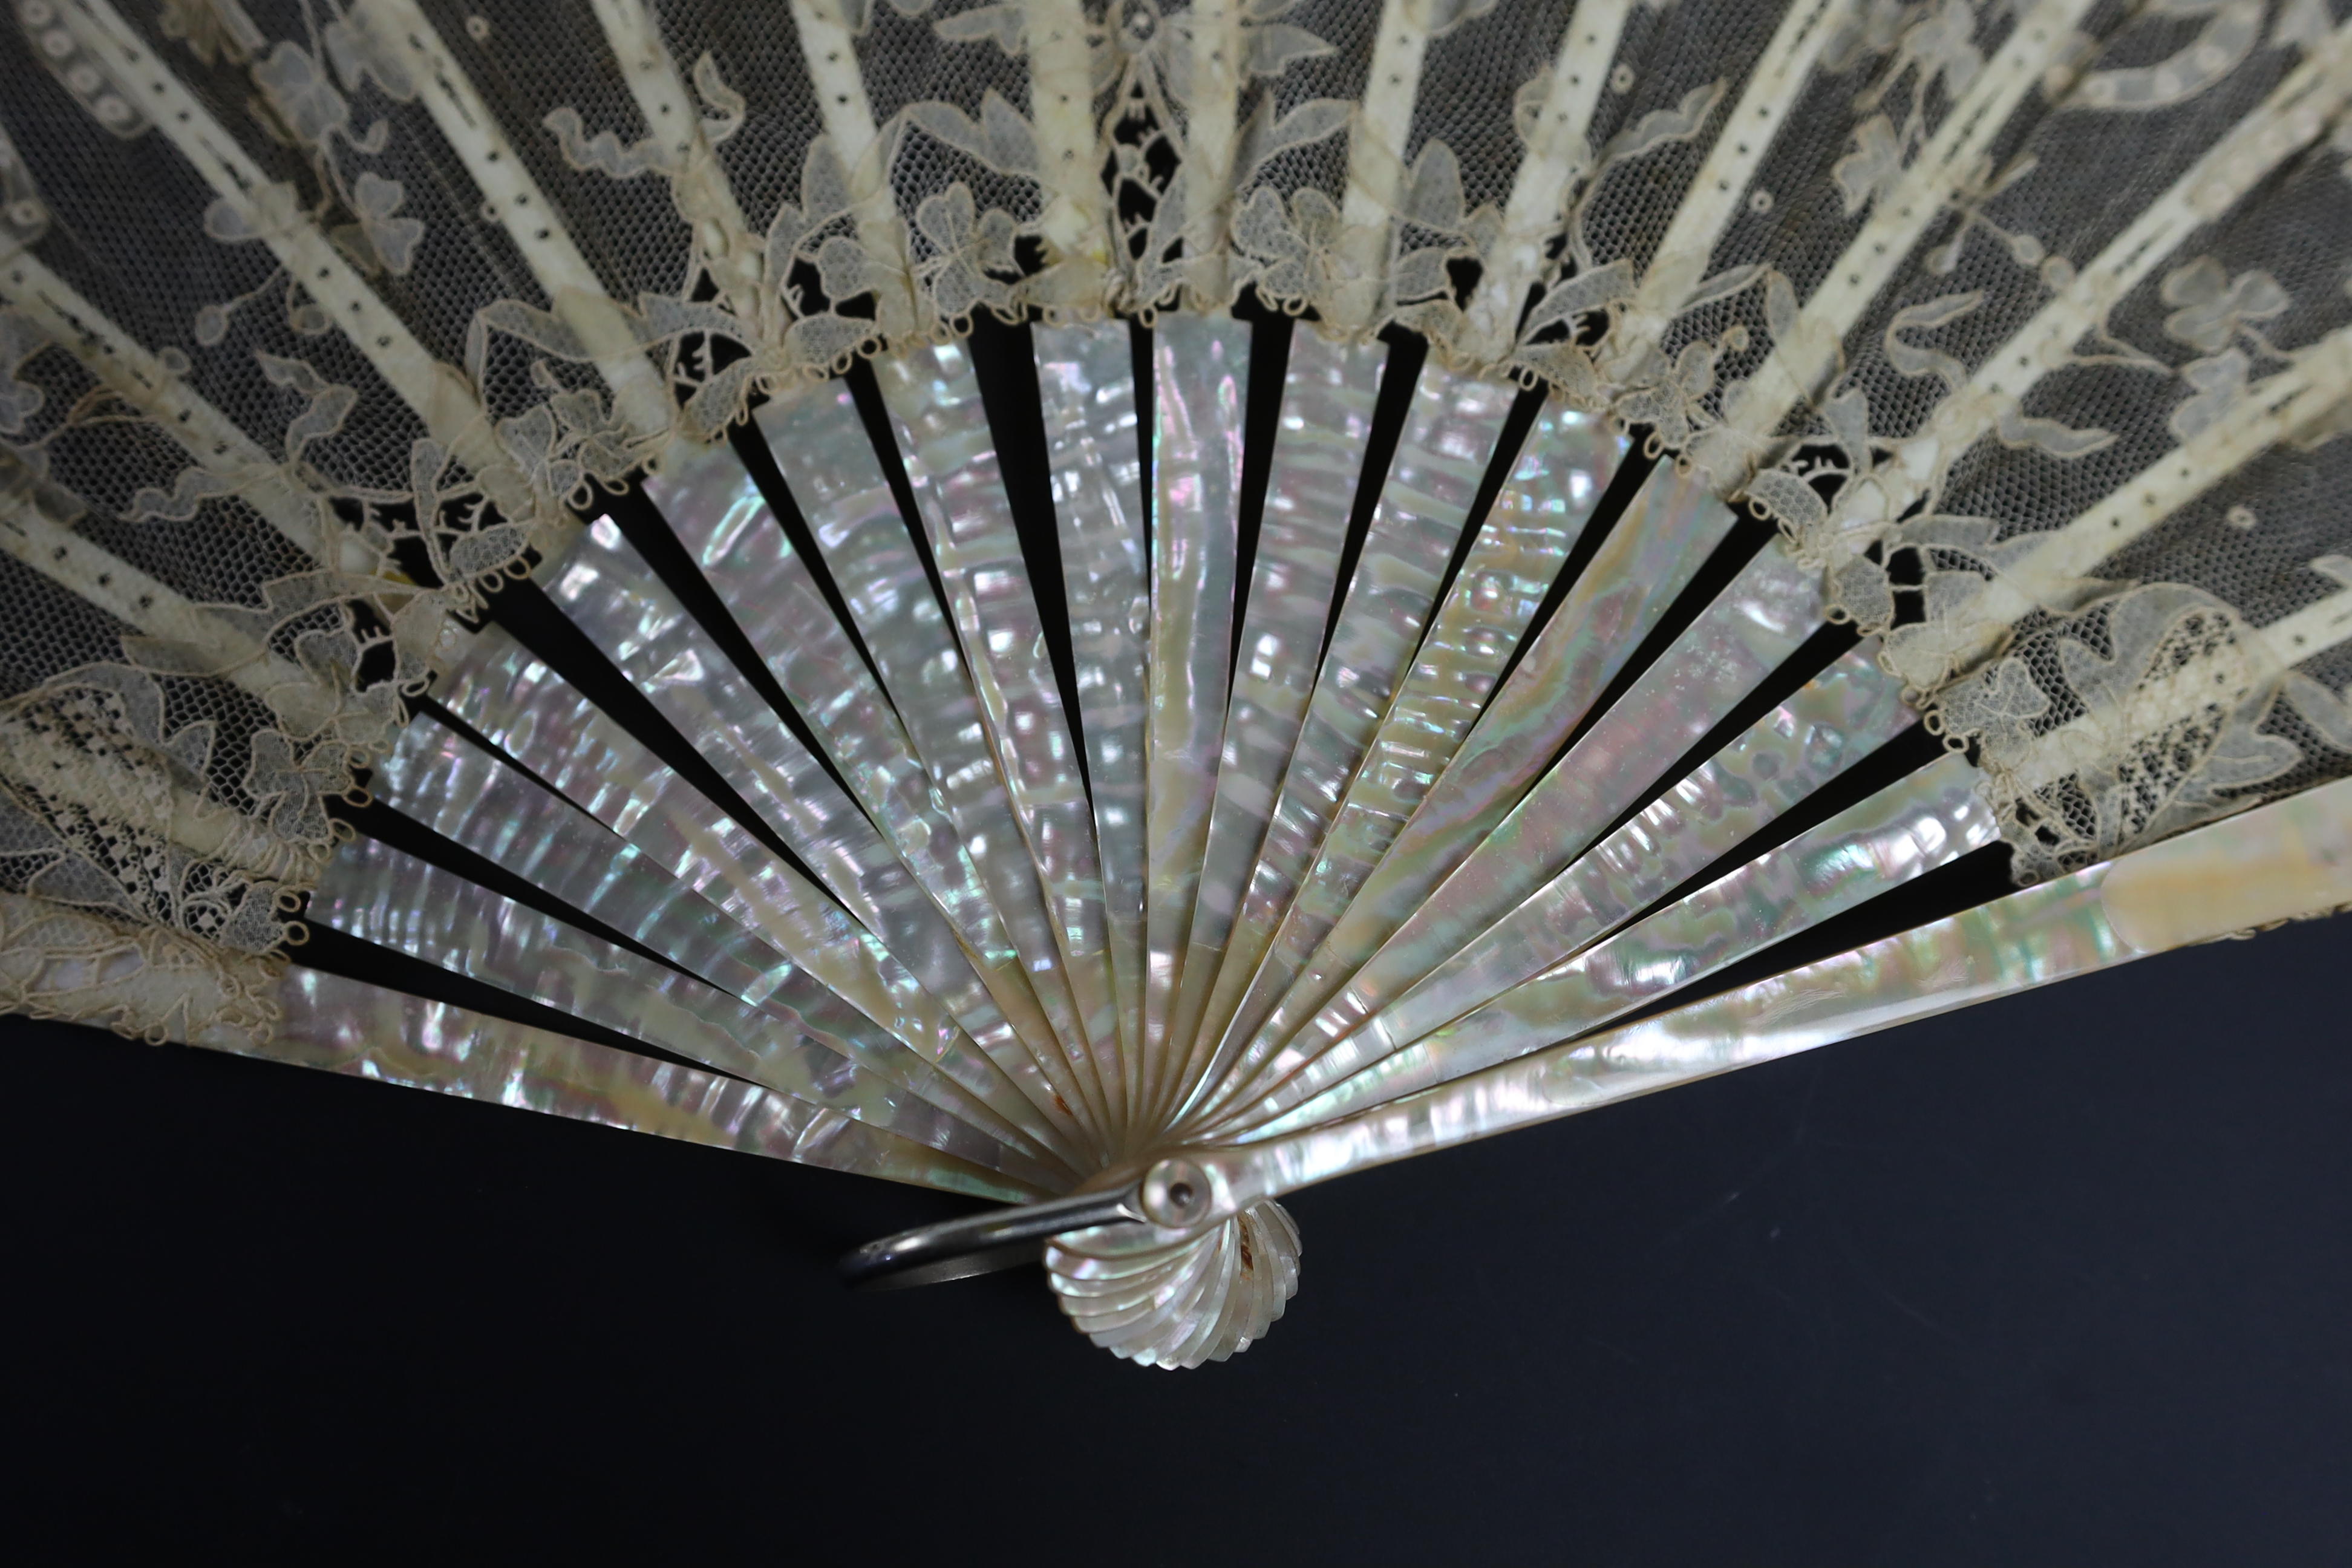 An unusual commemorative Carrickmacross lace fan, possibly one made and entered for a group of competitions held by the Worshipful Company of Fan Makers, the winning fan to be presented to Queen Victoria as a gift for he